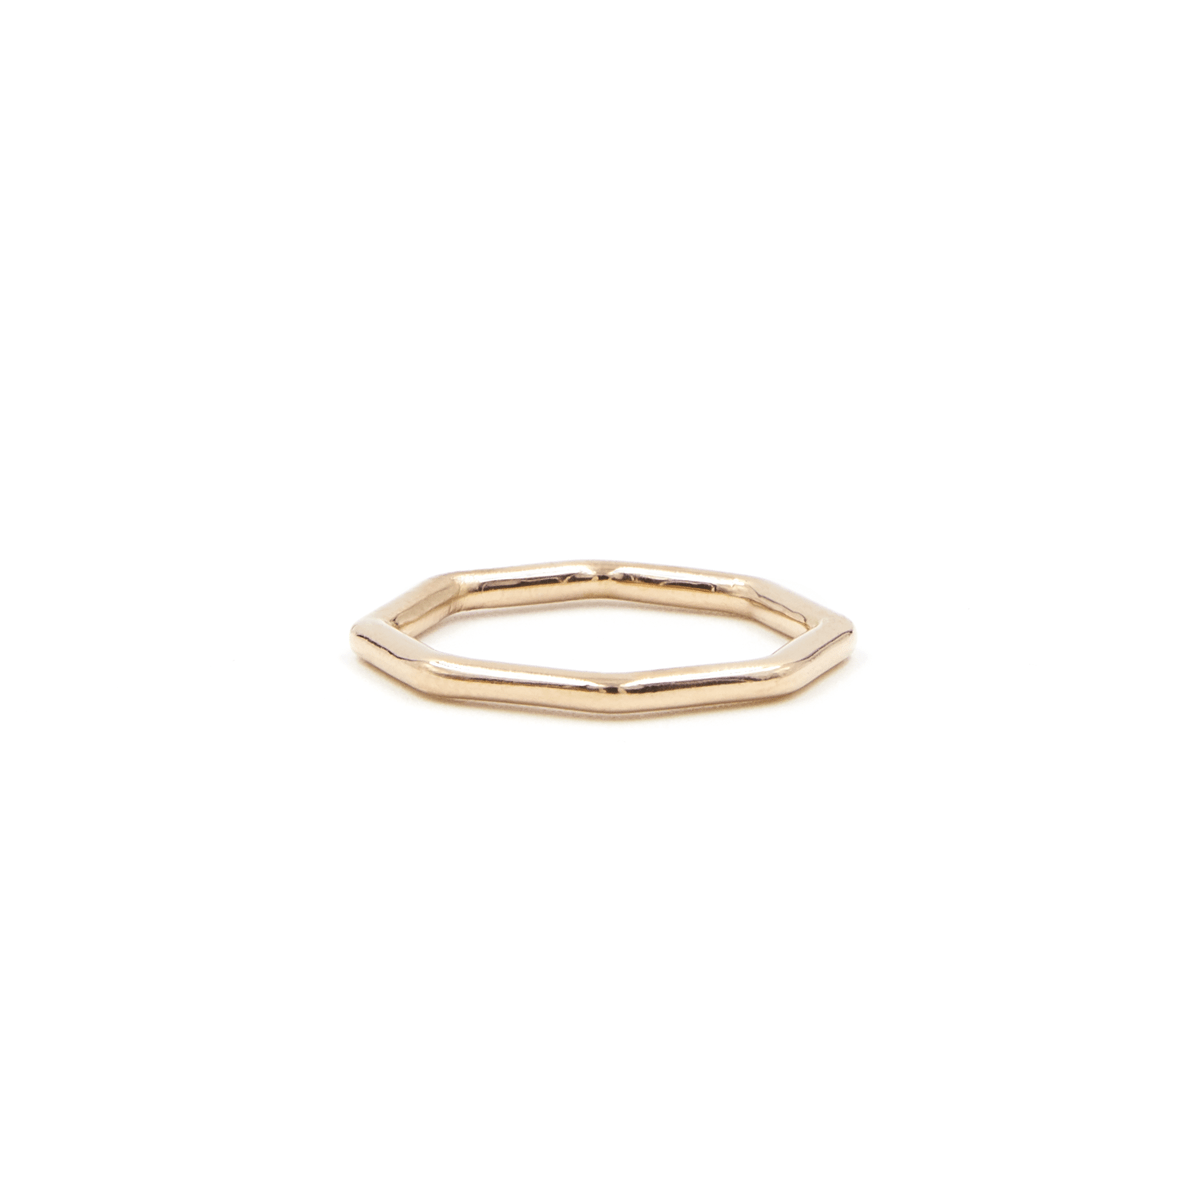 CHRIS AIRE WEDDING BAND - Chris Aire Fine Jewelry & Timepieces